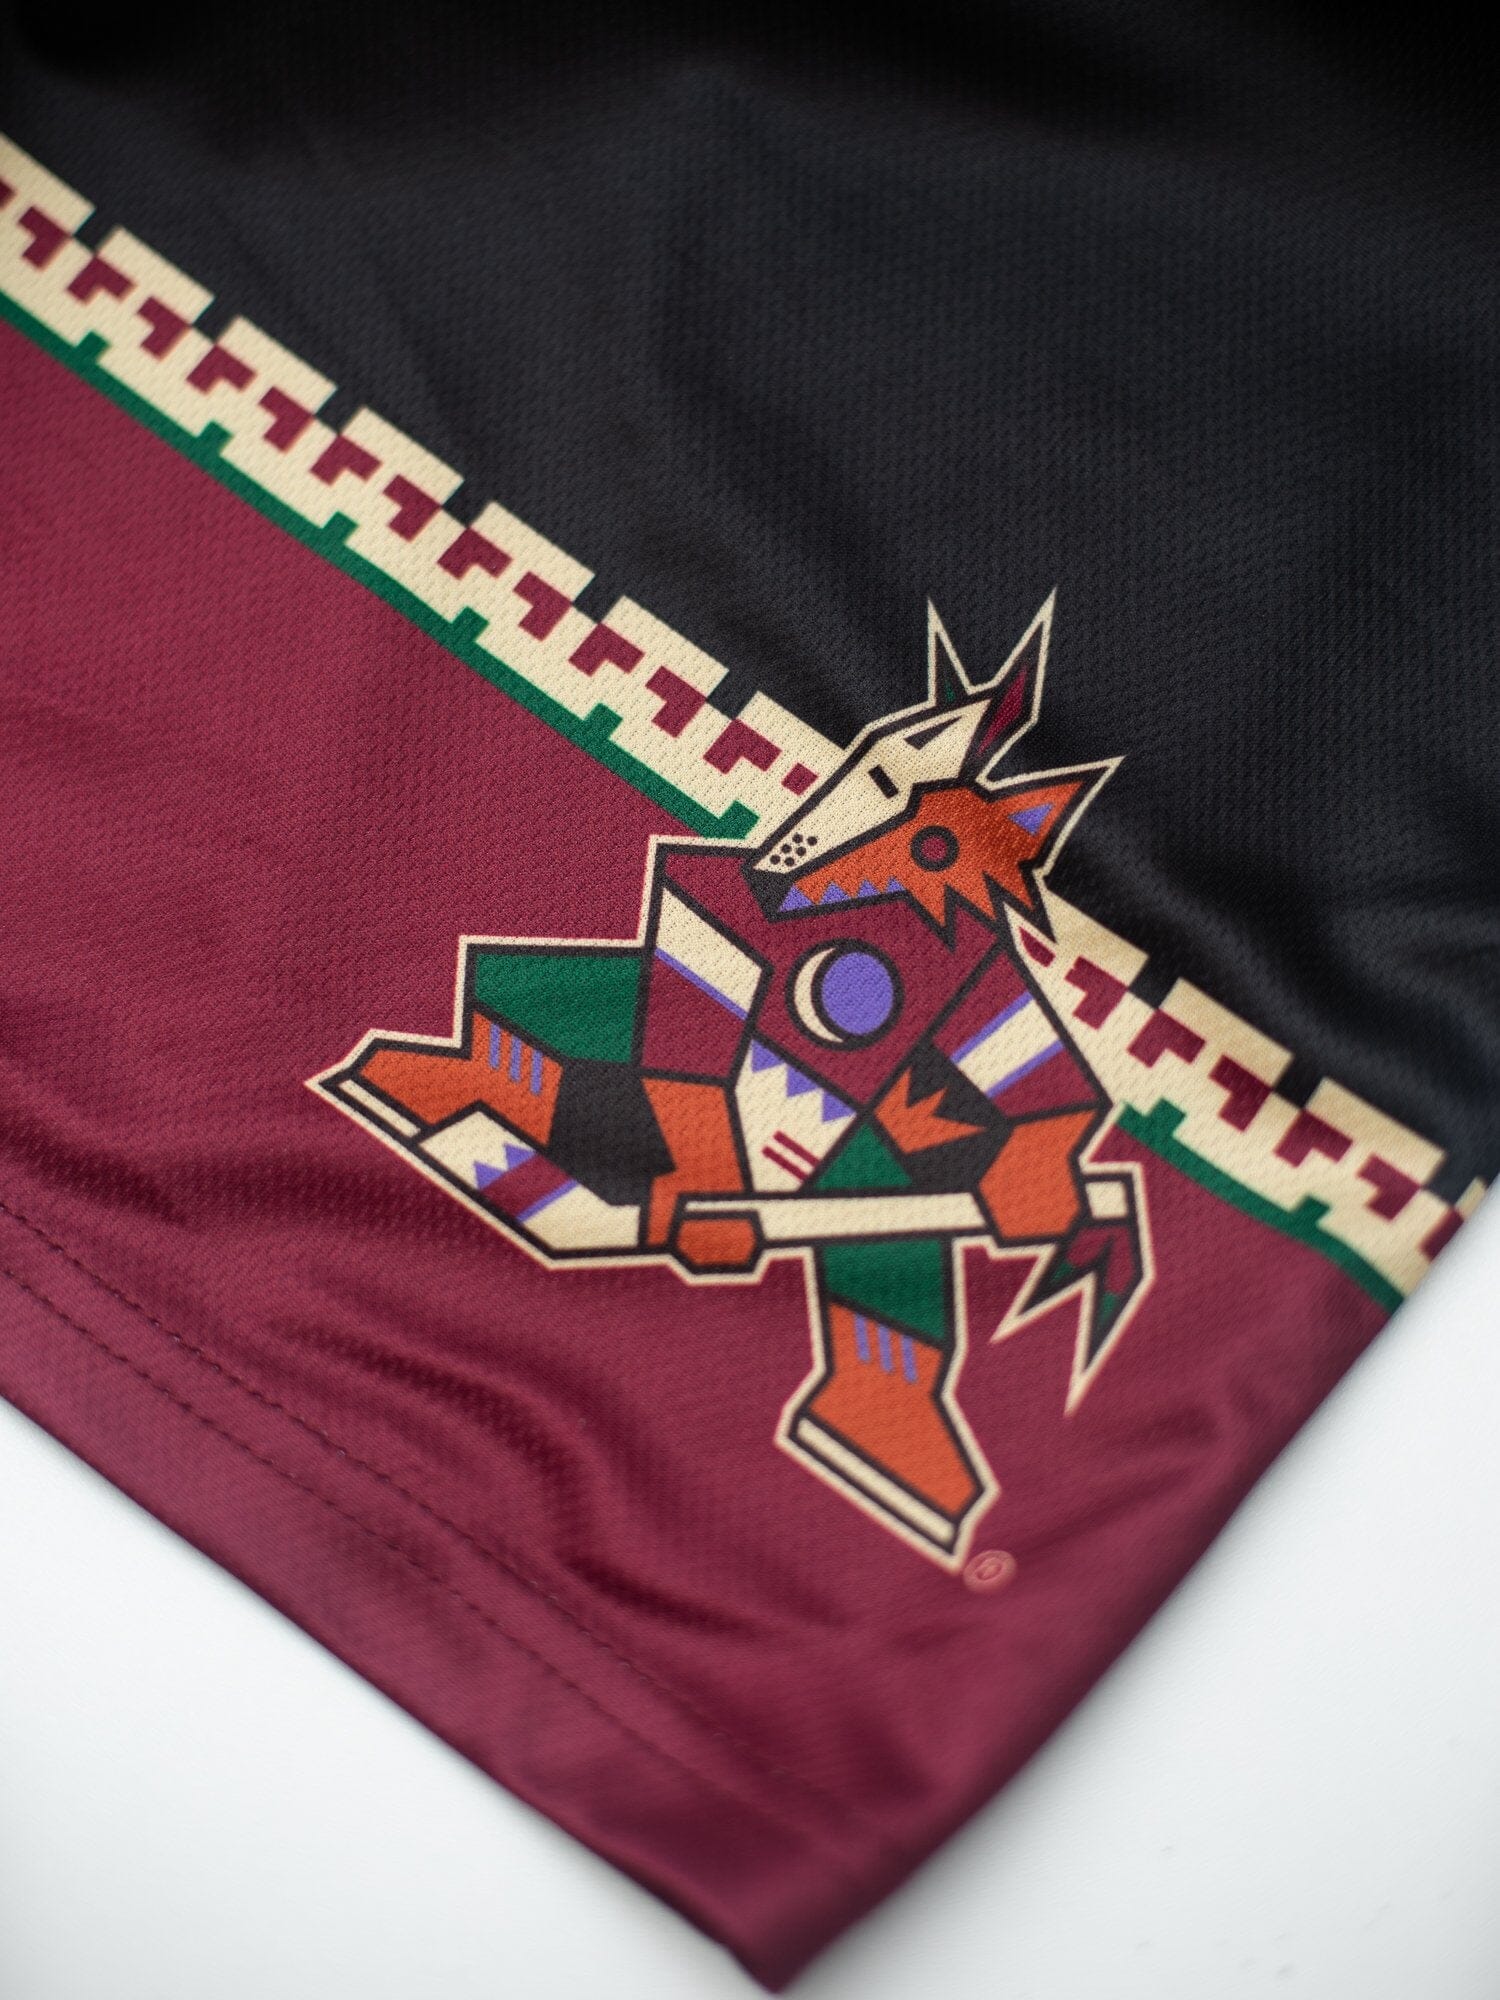 Coyotes reveal Black Kachina sweater as team's official third jersey